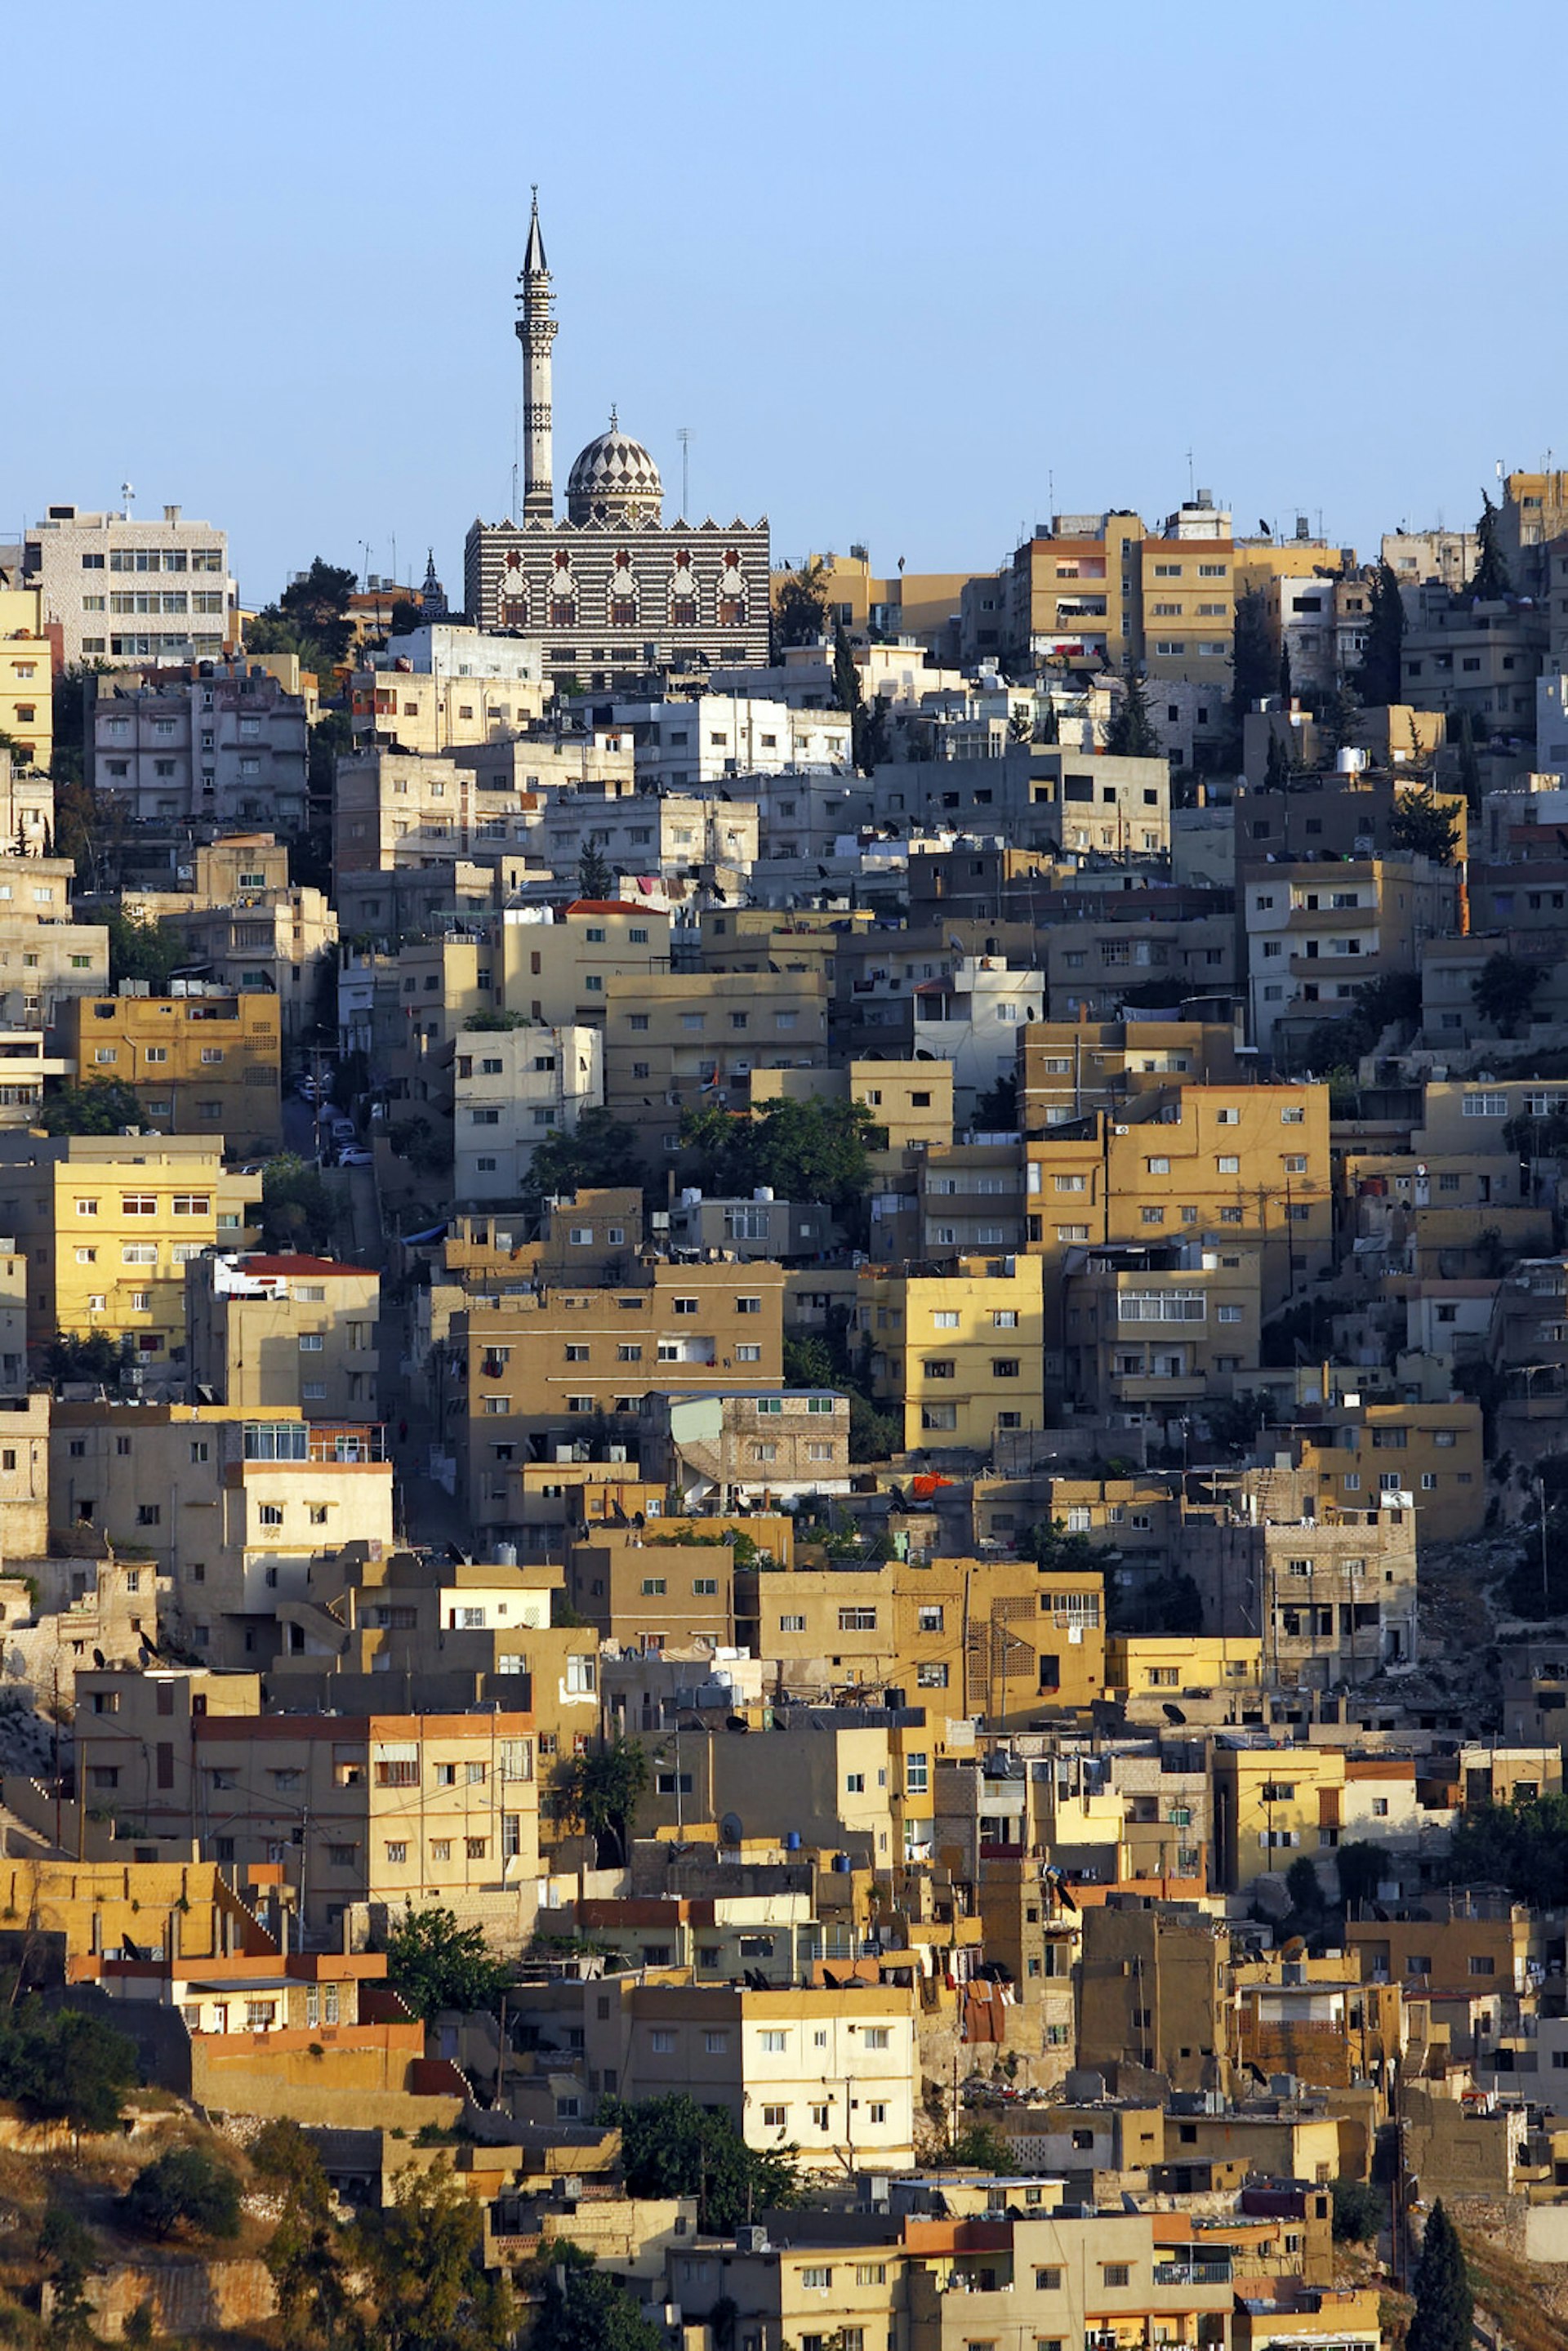 Mosque and houses in Amman, Jordan's capital, at sunset